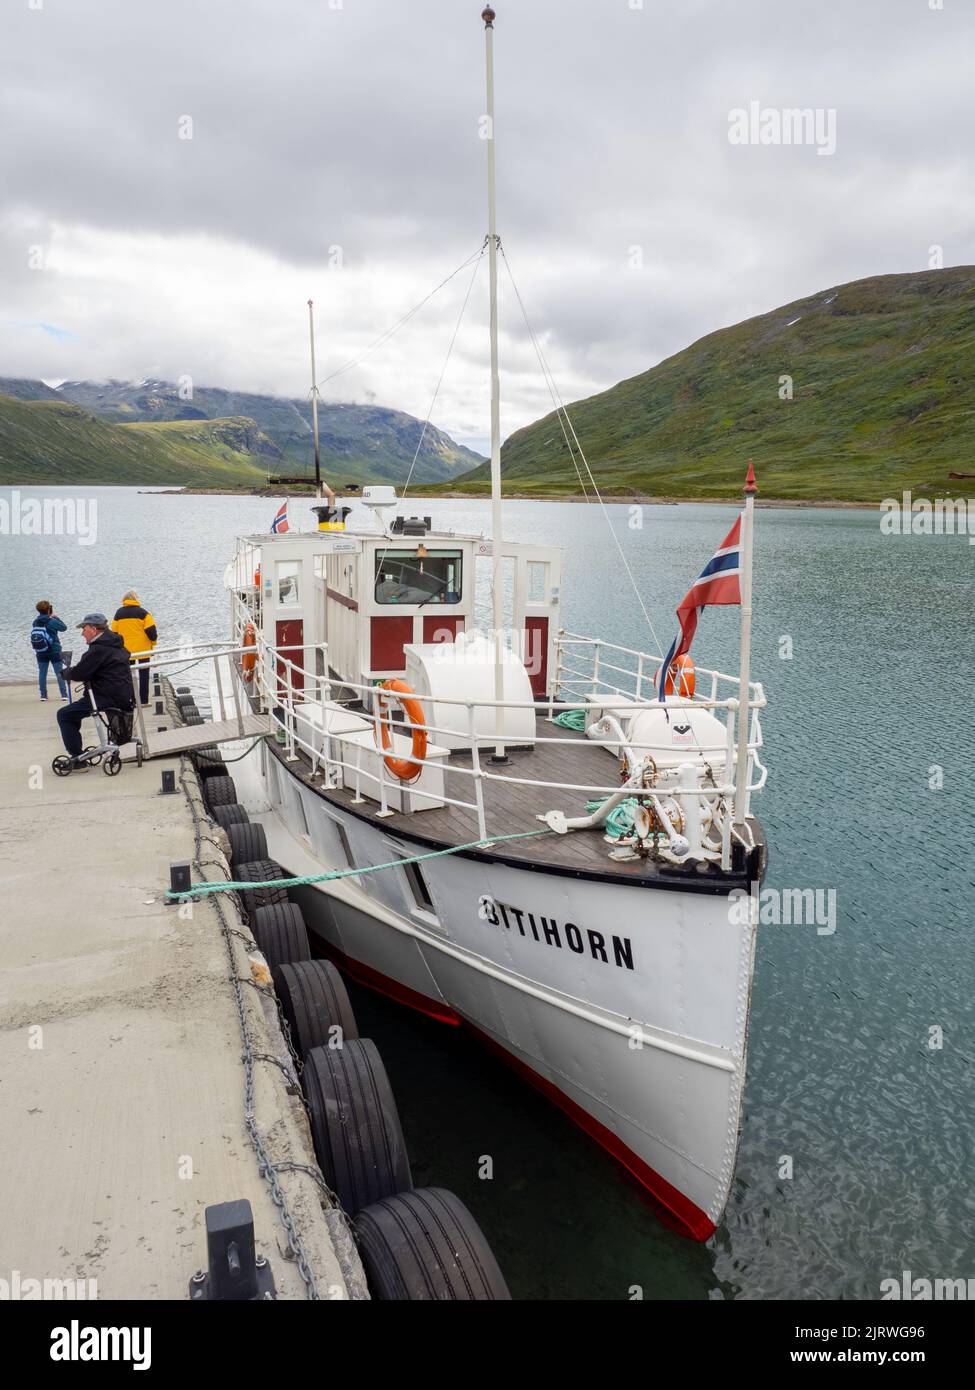 The ferry boat Bitihorn about to sail from Eidsbugarden to Bygdin on lake Bygdin in the Jotunheimen National Park Norway Stock Photo